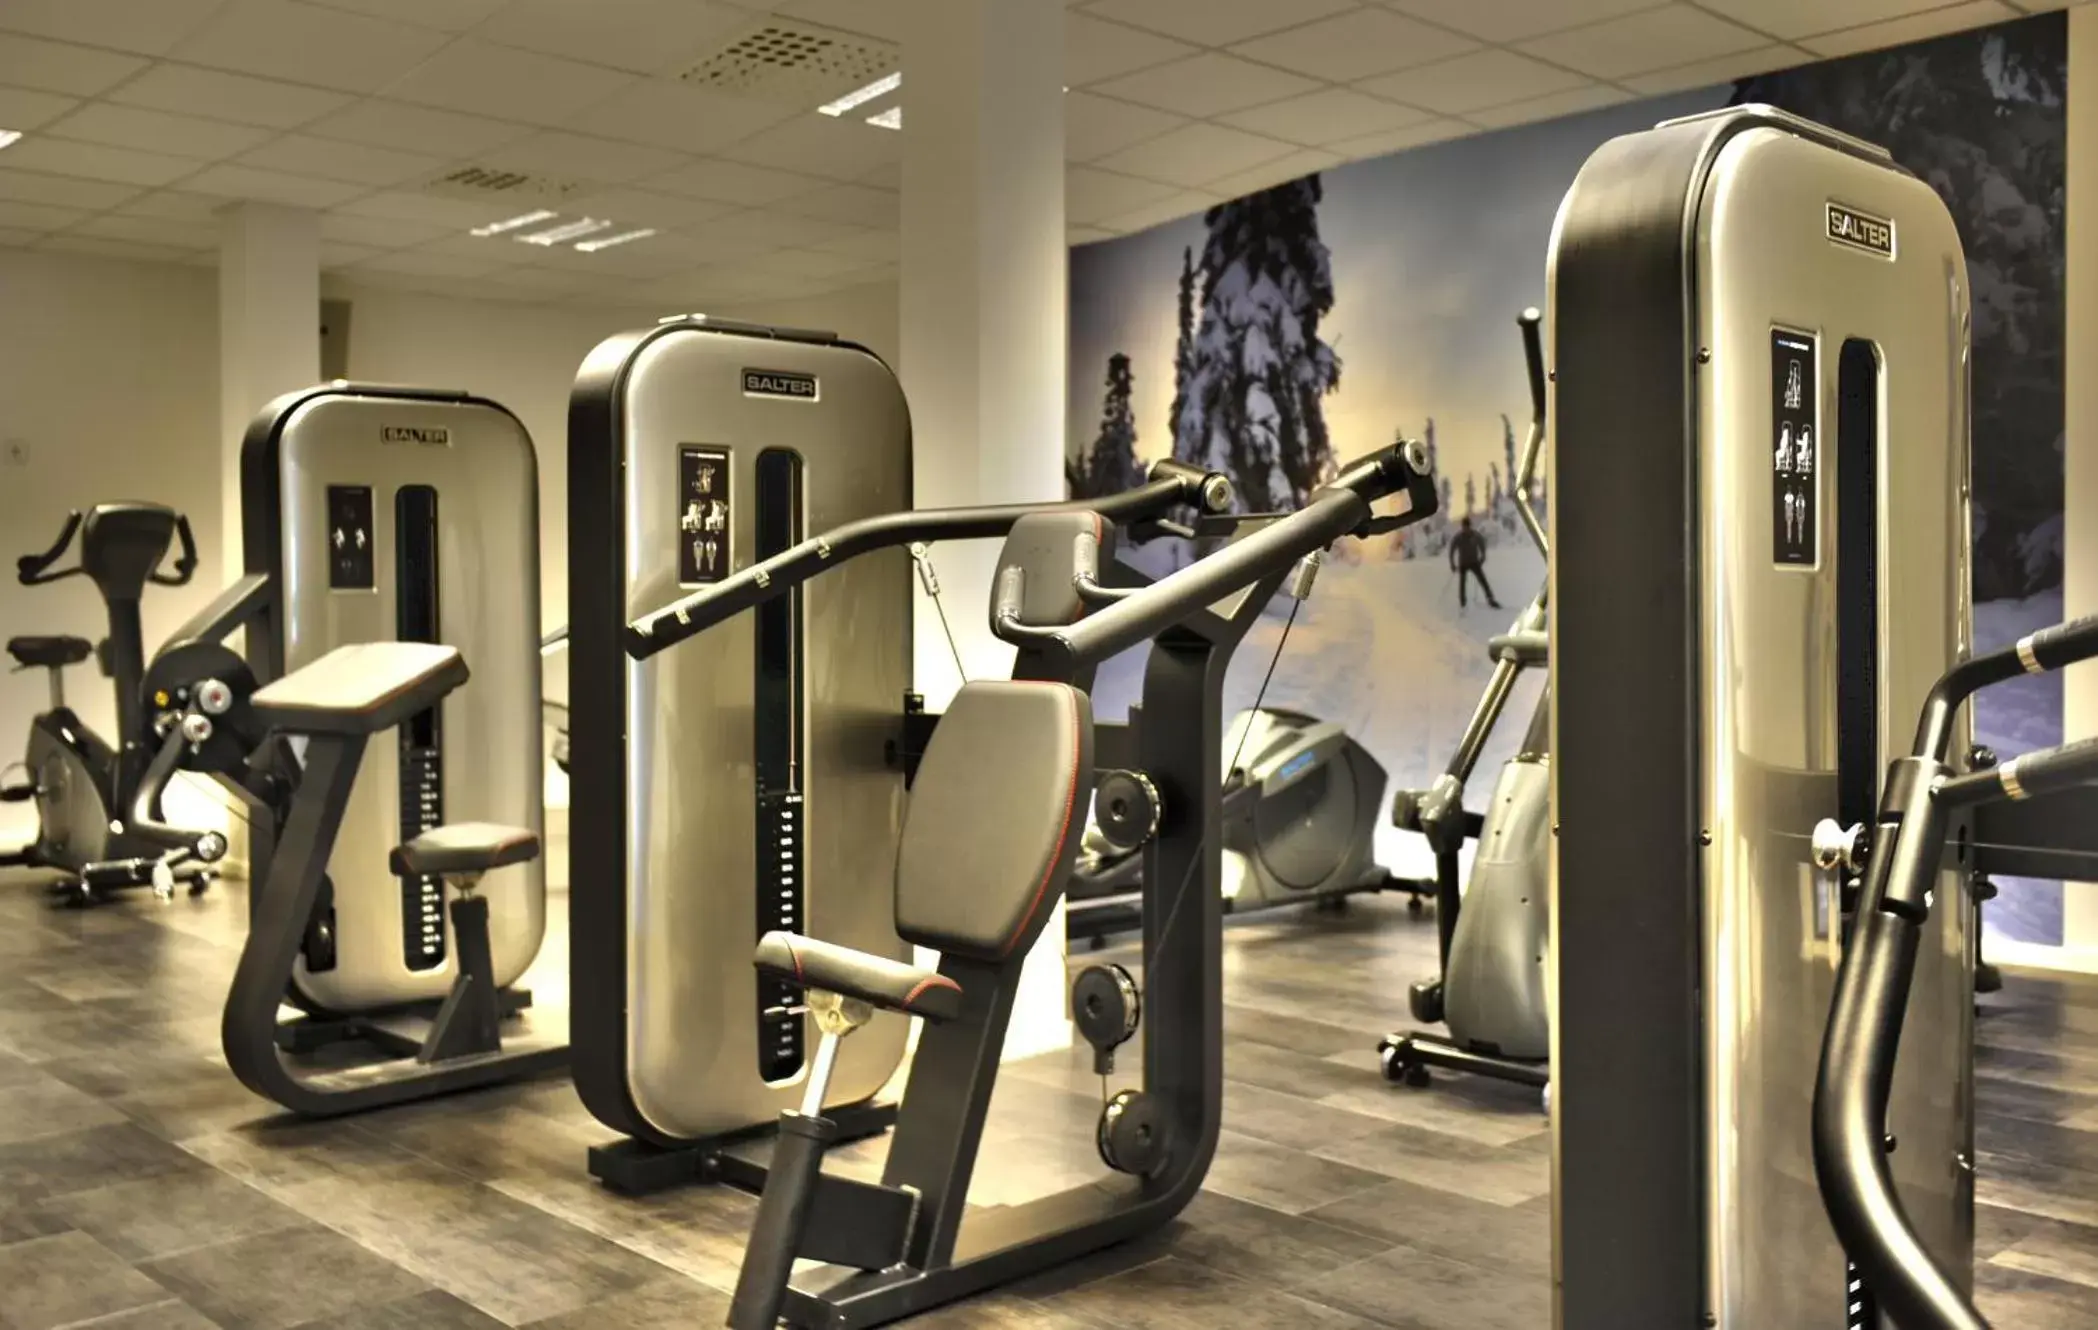 Fitness centre/facilities, Fitness Center/Facilities in Grand Hotel Lapland